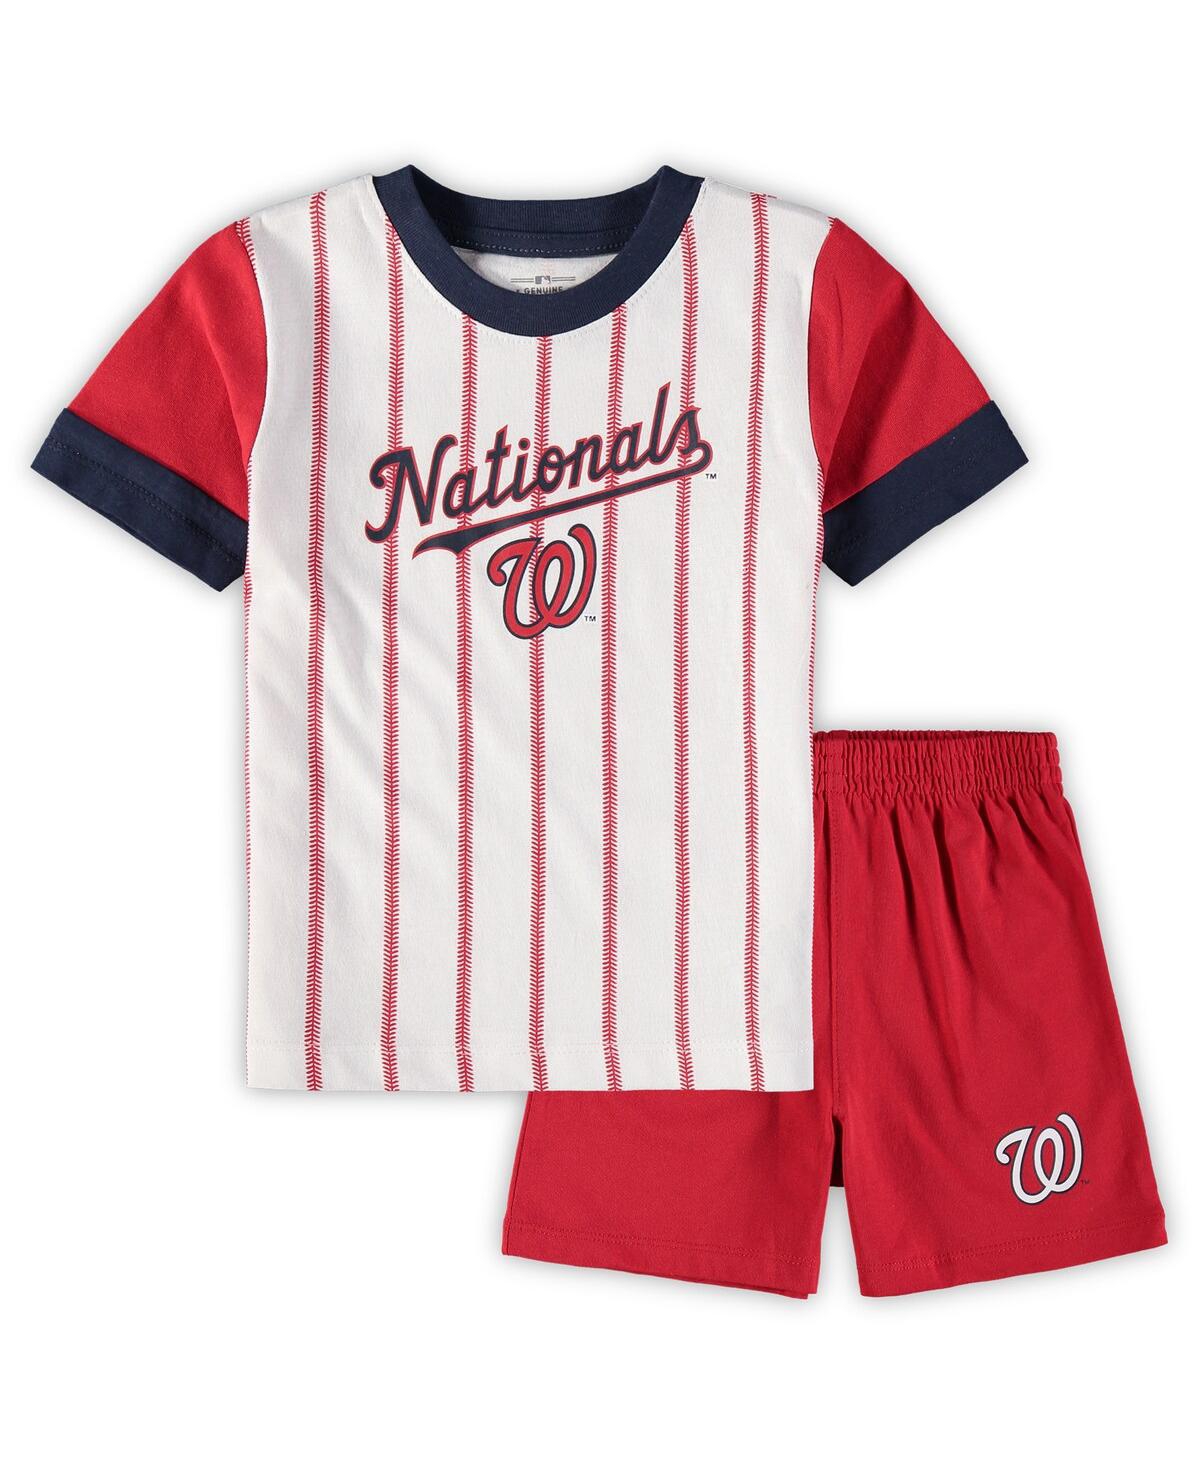 OUTERSTUFF TODDLER BOYS WHITE, RED WASHINGTON NATIONALS POSITION PLAYER T-SHIRT AND SHORTS SET